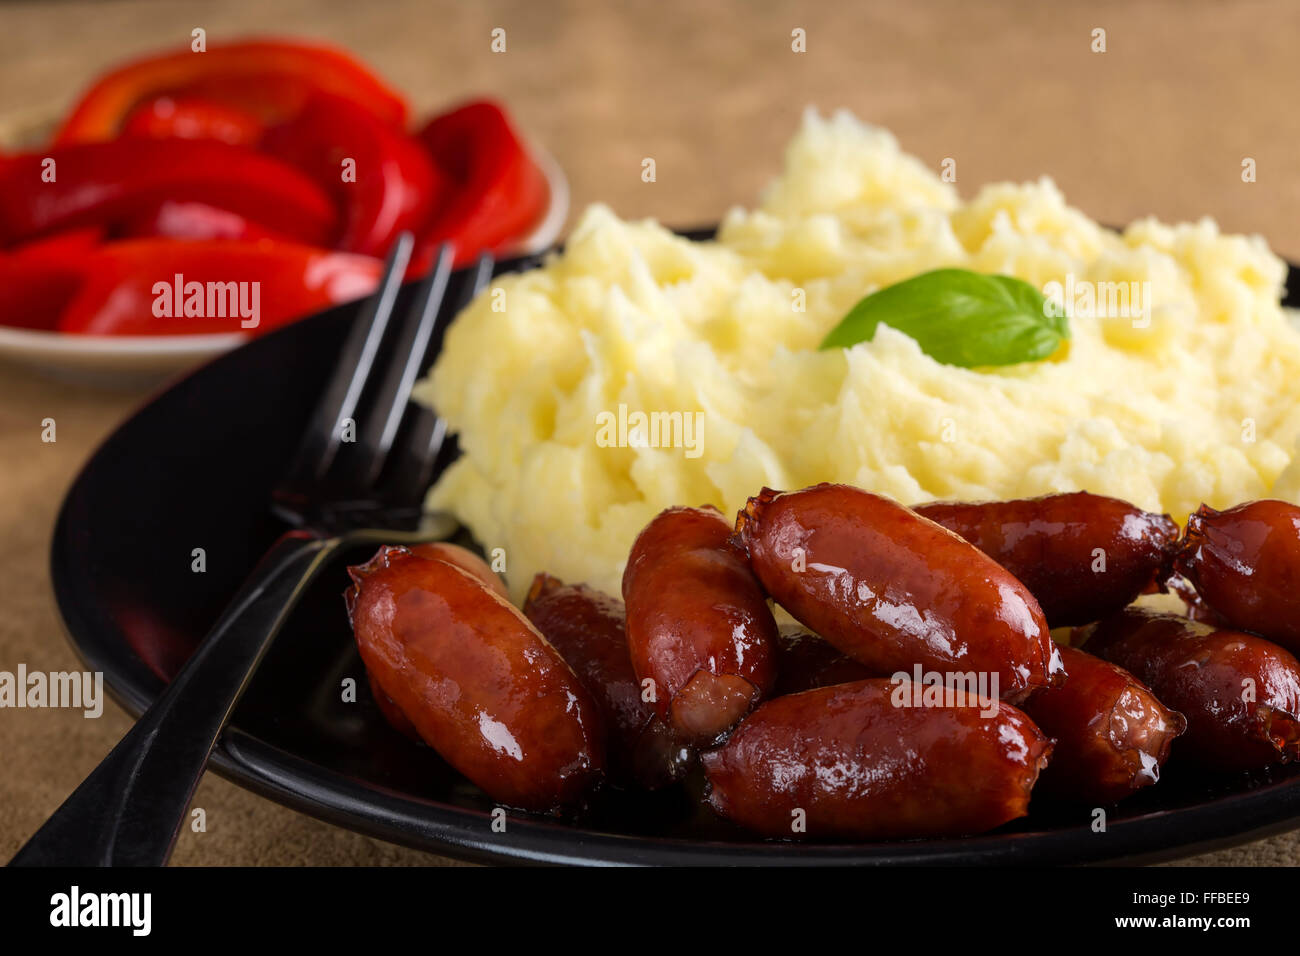 Sausages and mashed potato with pickles in background Stock Photo